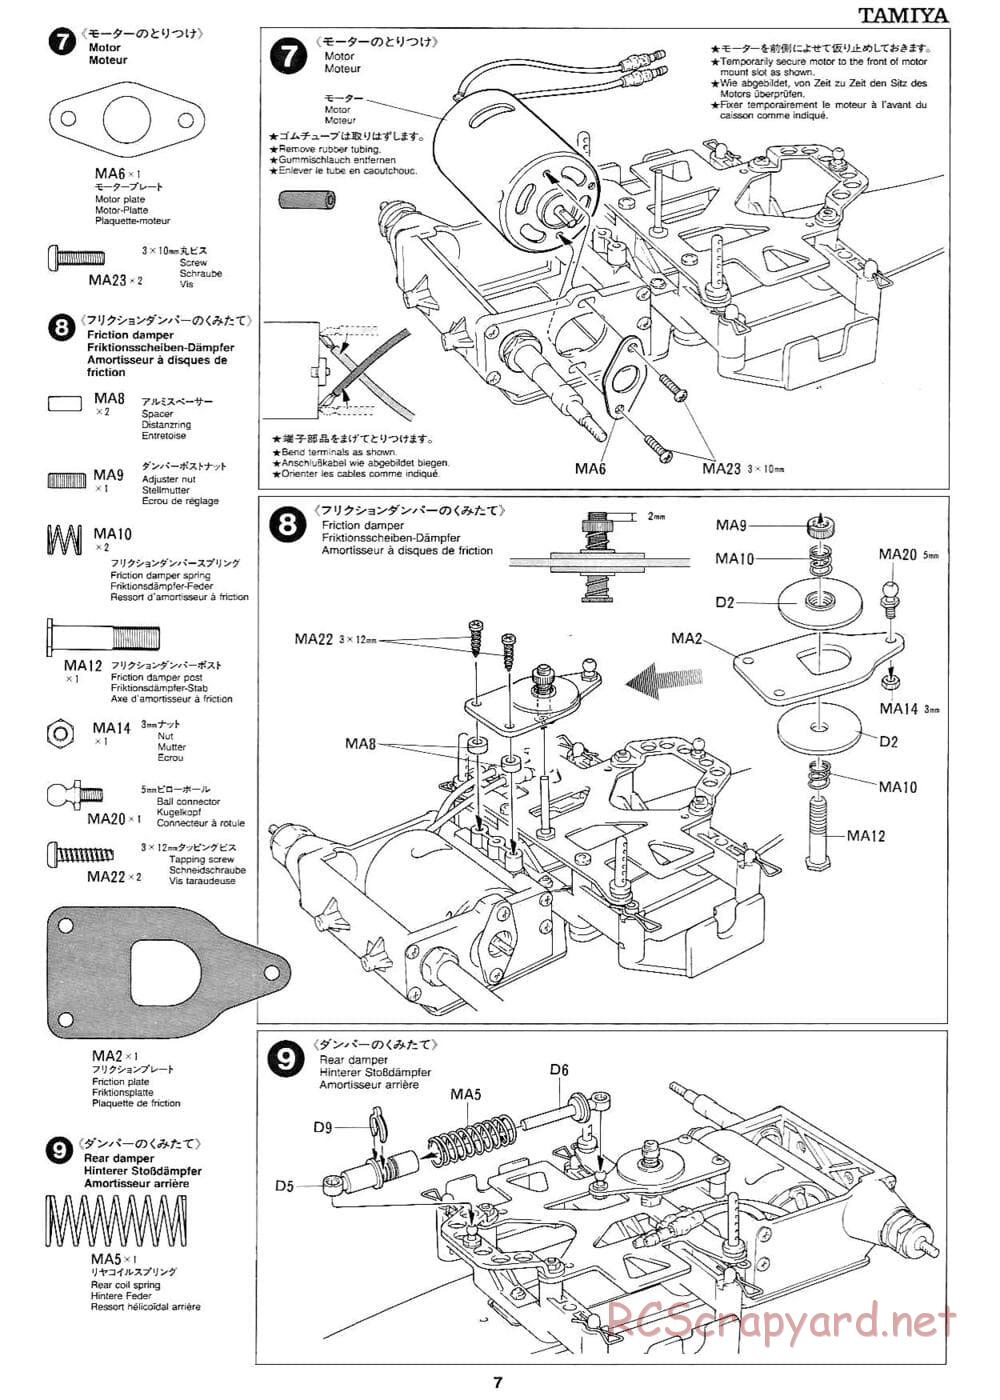 Tamiya - Toyota GT-One TS020 - F103RS Chassis - Manual - Page 7